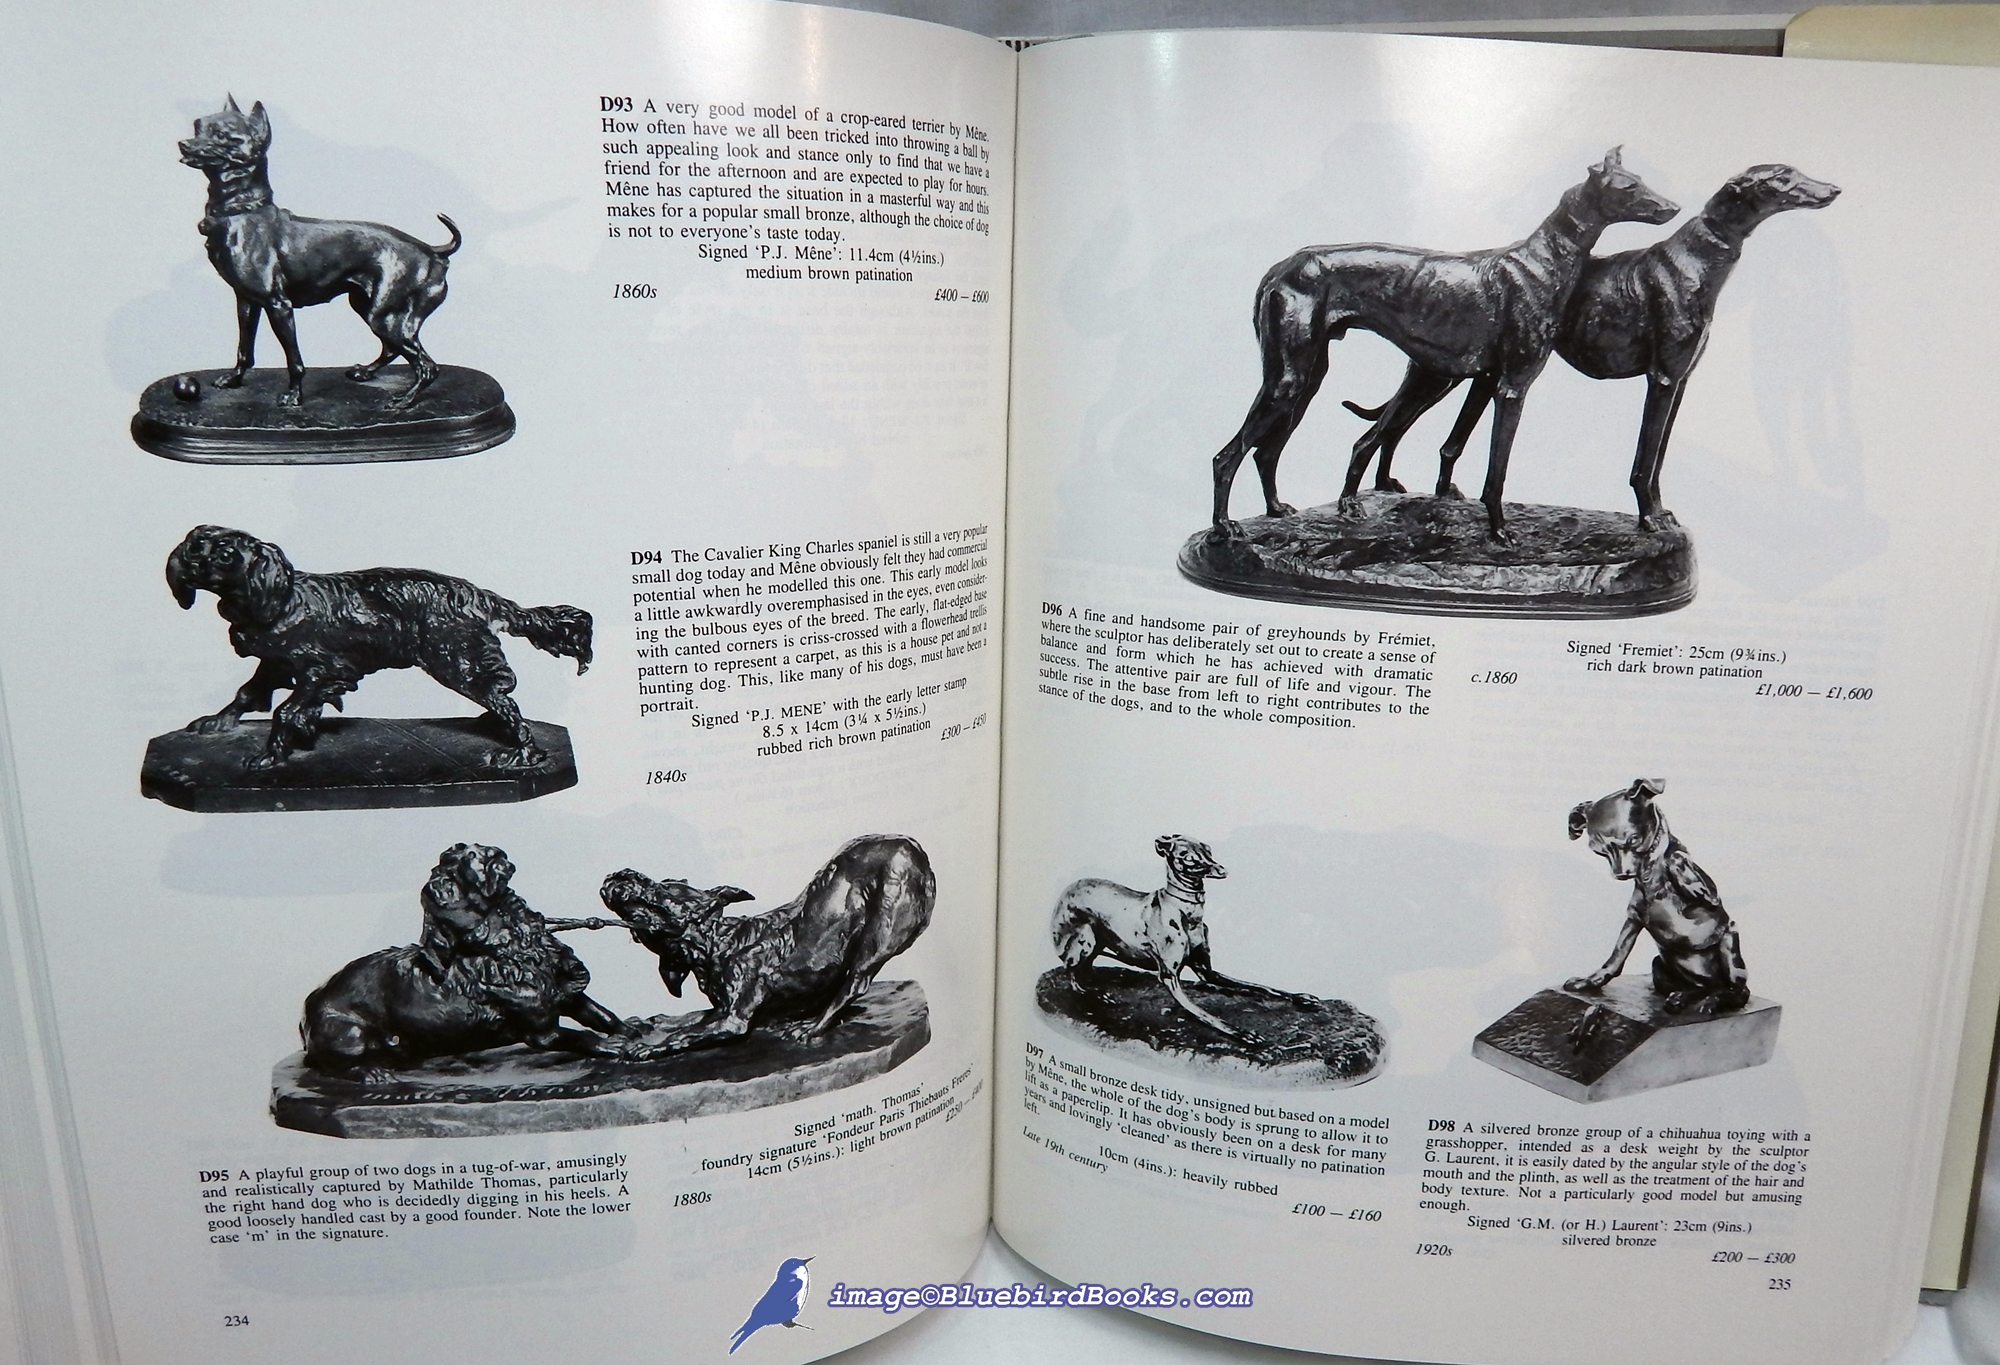 PAYNE, CHRISTOPHER - Animals in Bronze: Reference and Price Guide